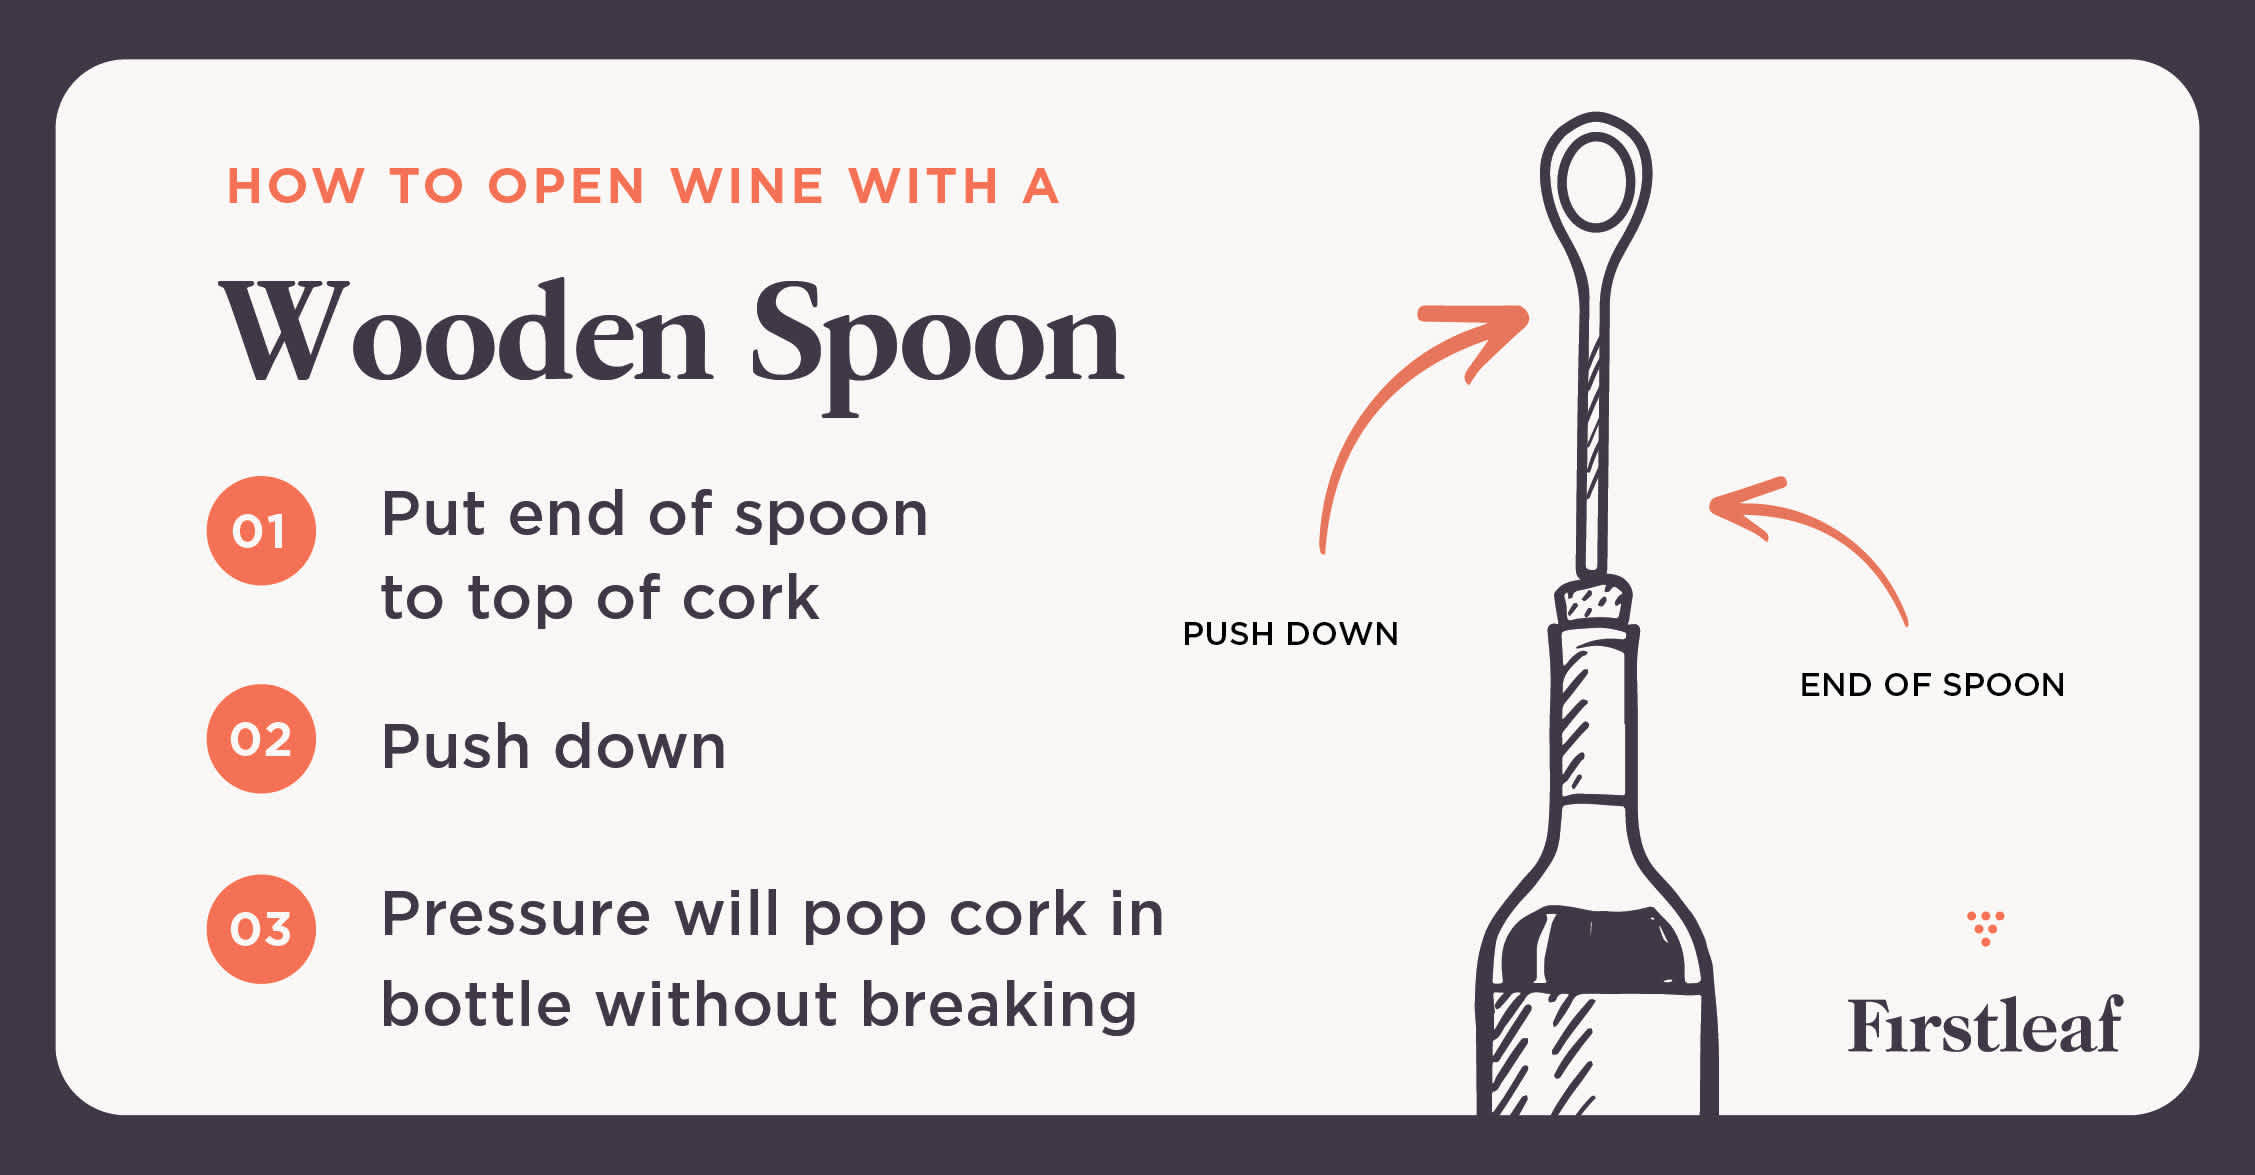 How to Open Wine with Wooden Spoon